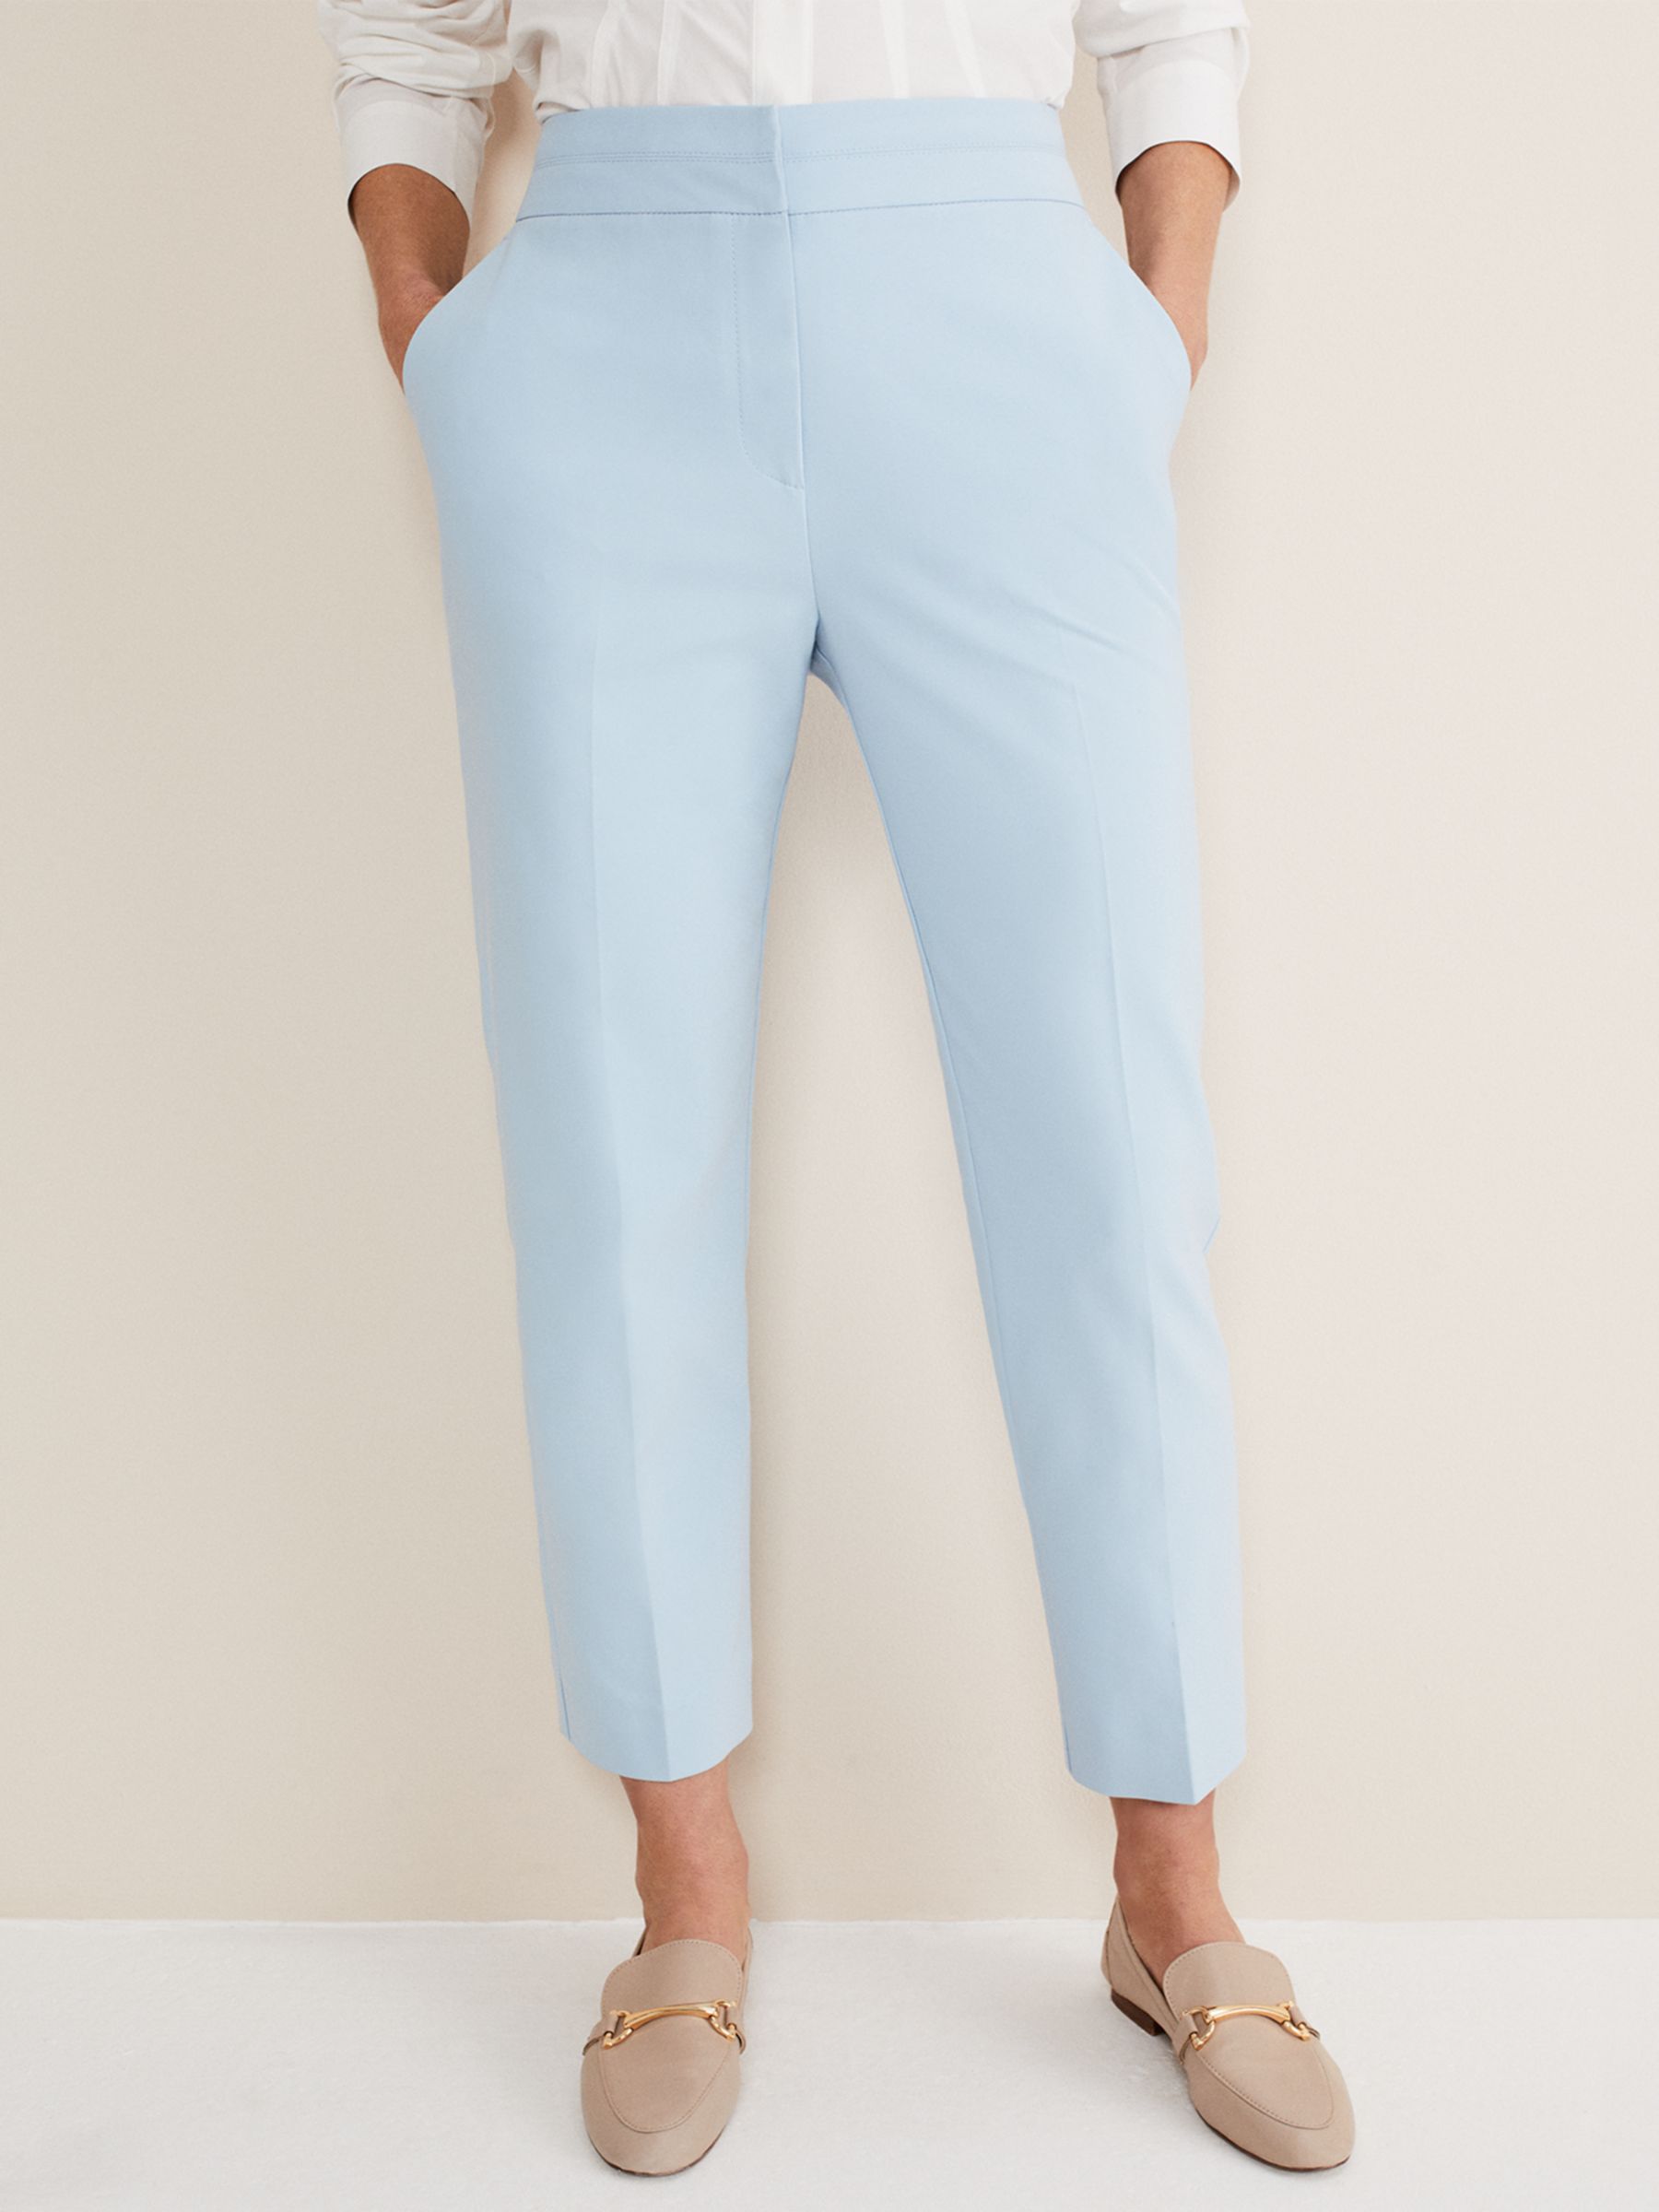 Phase Eight Julianna Cropped Cotton Blend Trousers, Cornflower Blue, 18